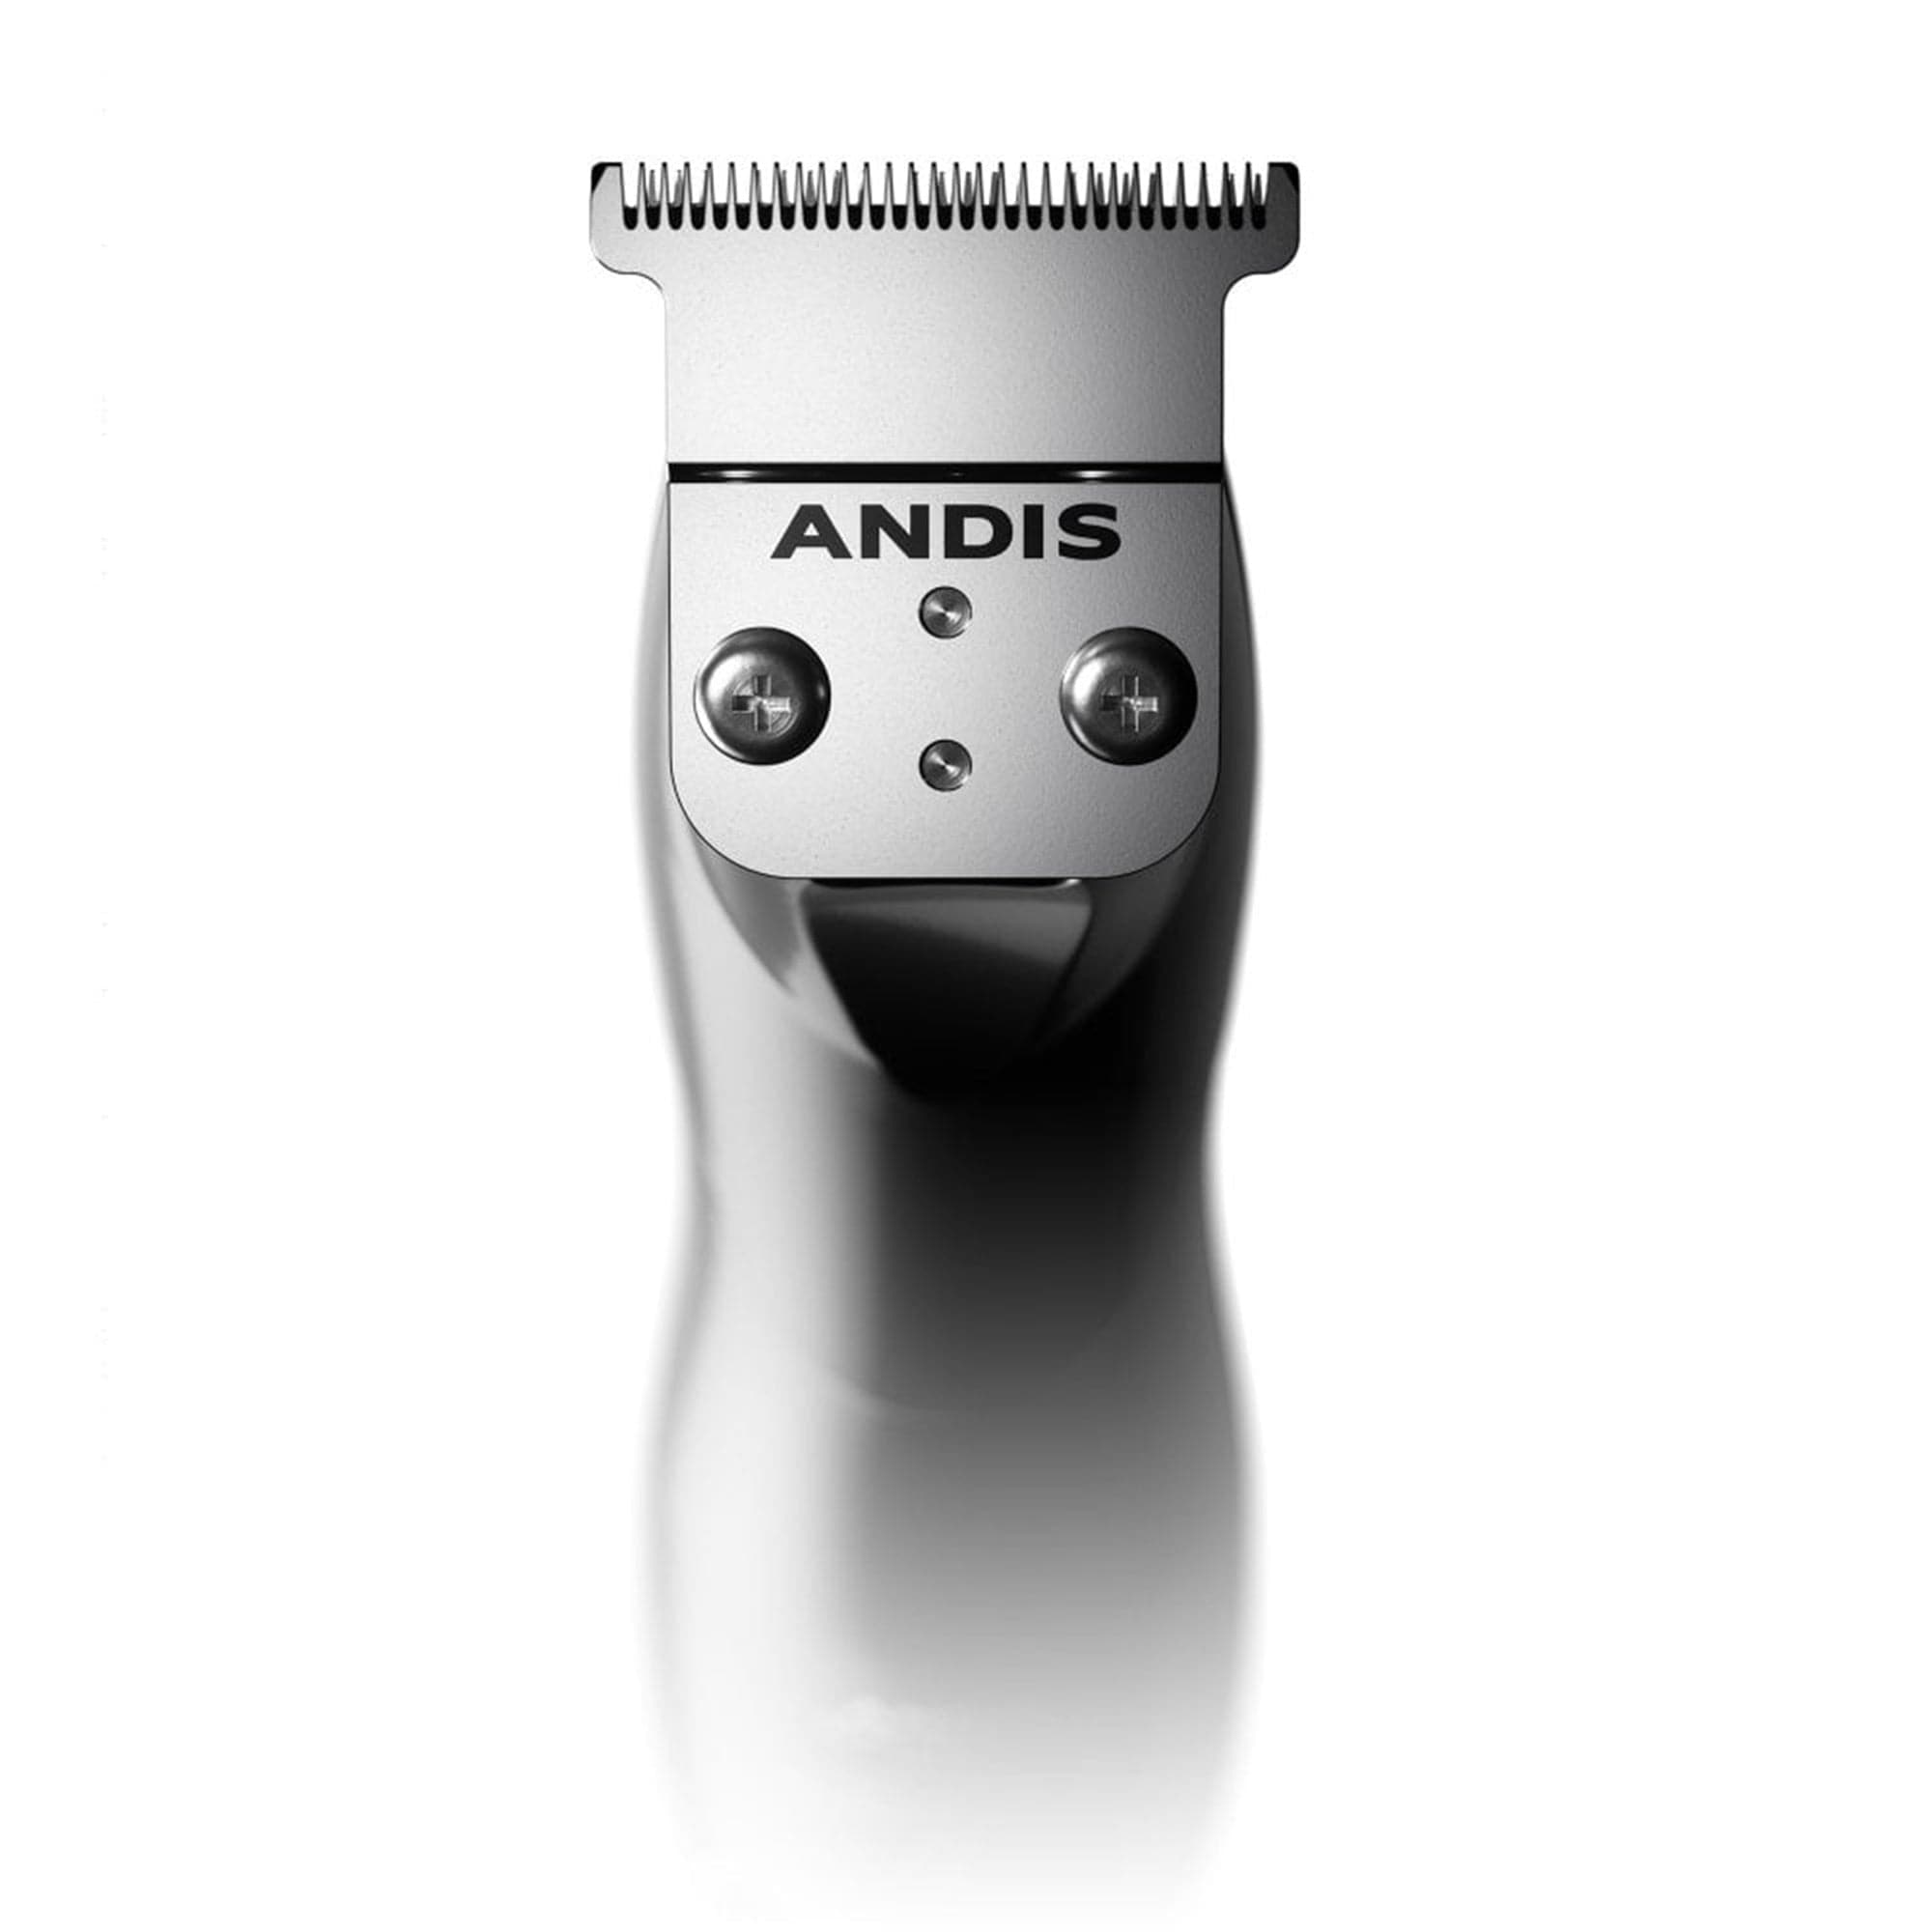 Andis - Slimline Pro Li Professional Cordless Rechargeable Trimmer - Eson Direct